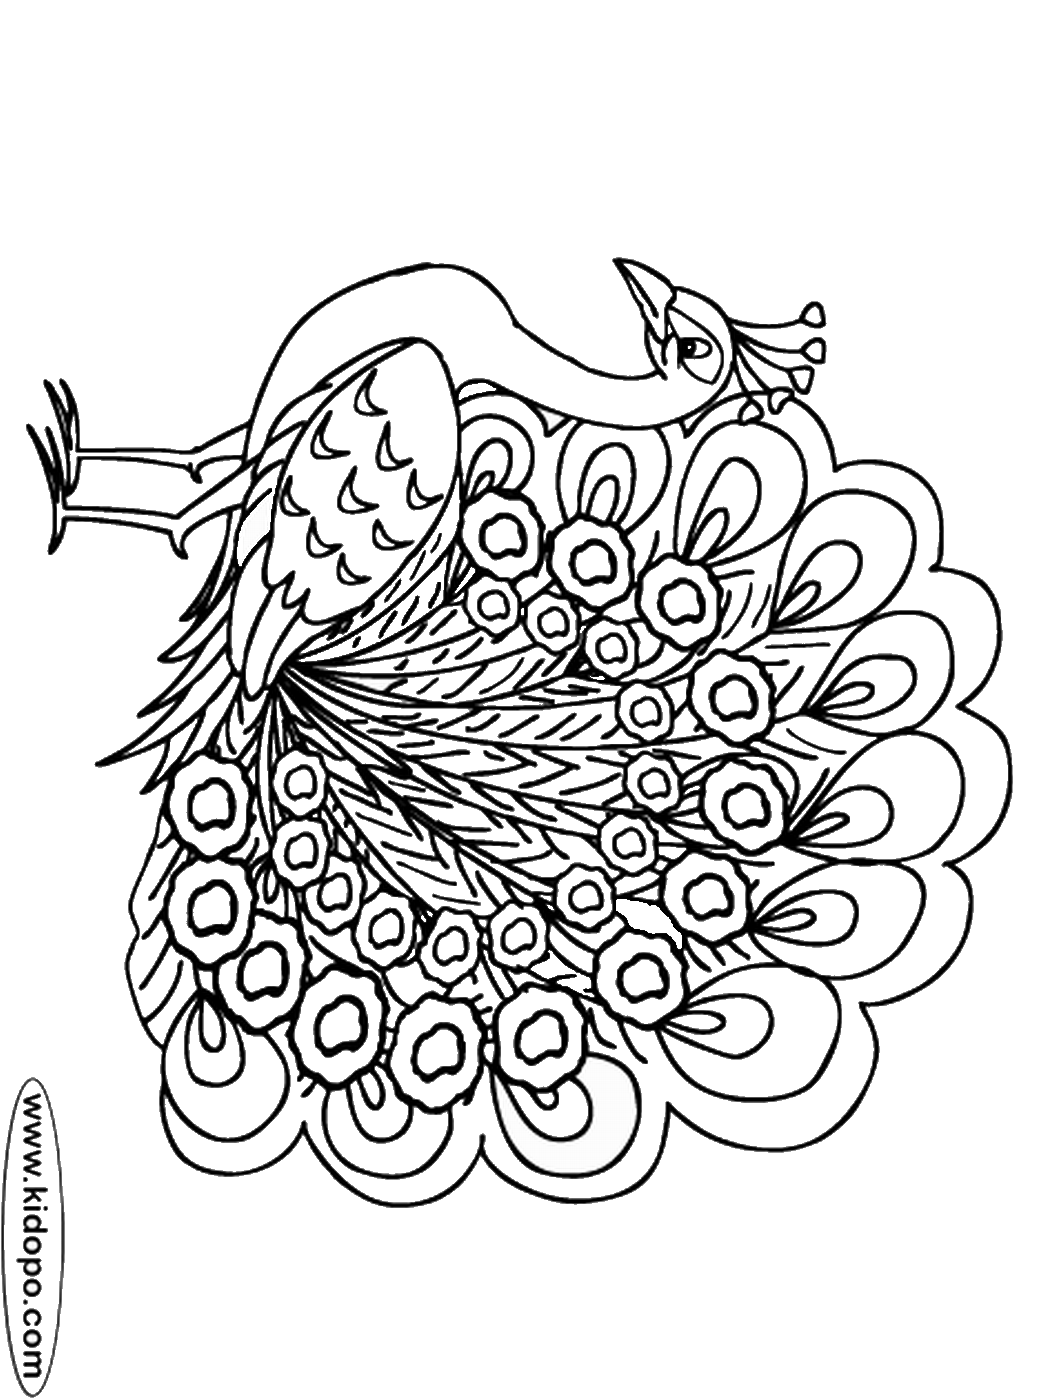 picture of peacock for colouring peacock coloring pages colouring for peacock picture of 